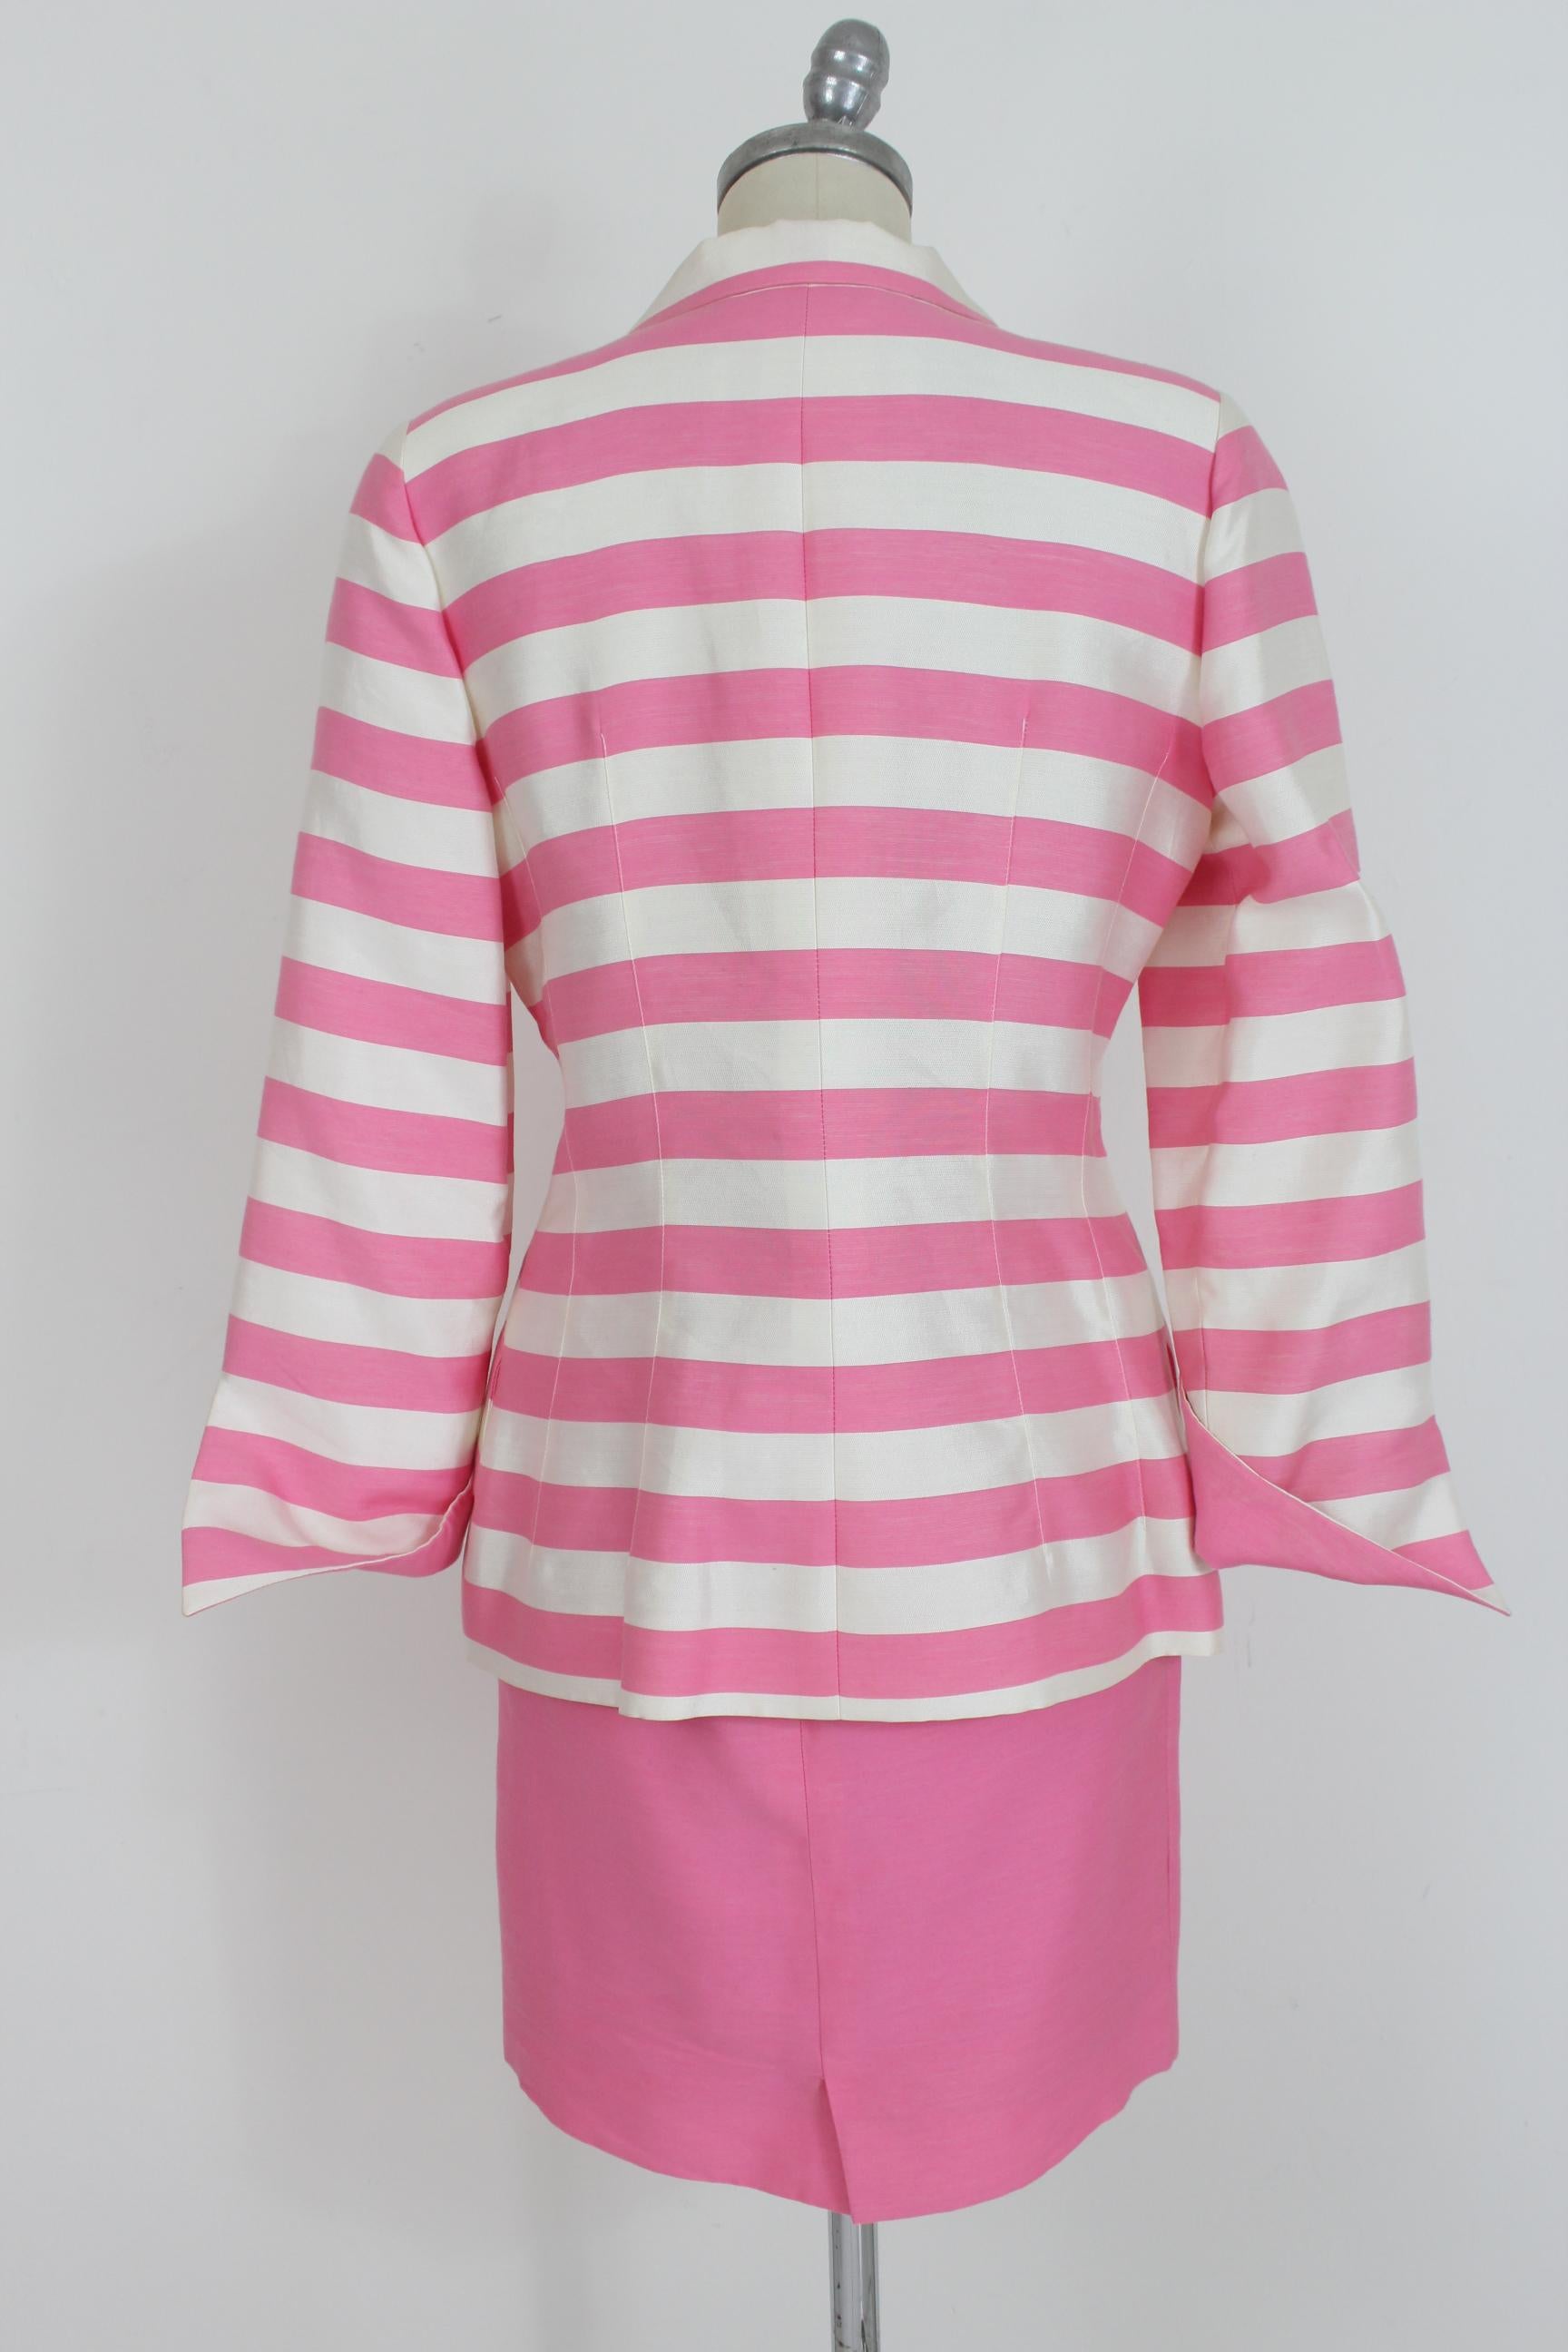 Nina Ricci Boutique 80s vintage cocktail women's skirt suit. Pink and white striped double-breasted jacket, pink sheath skirt. 50% viscose 38% cotton 12% silk. Made in France. Very good vintage conditions there are some small spots.

Size: 44 It 10